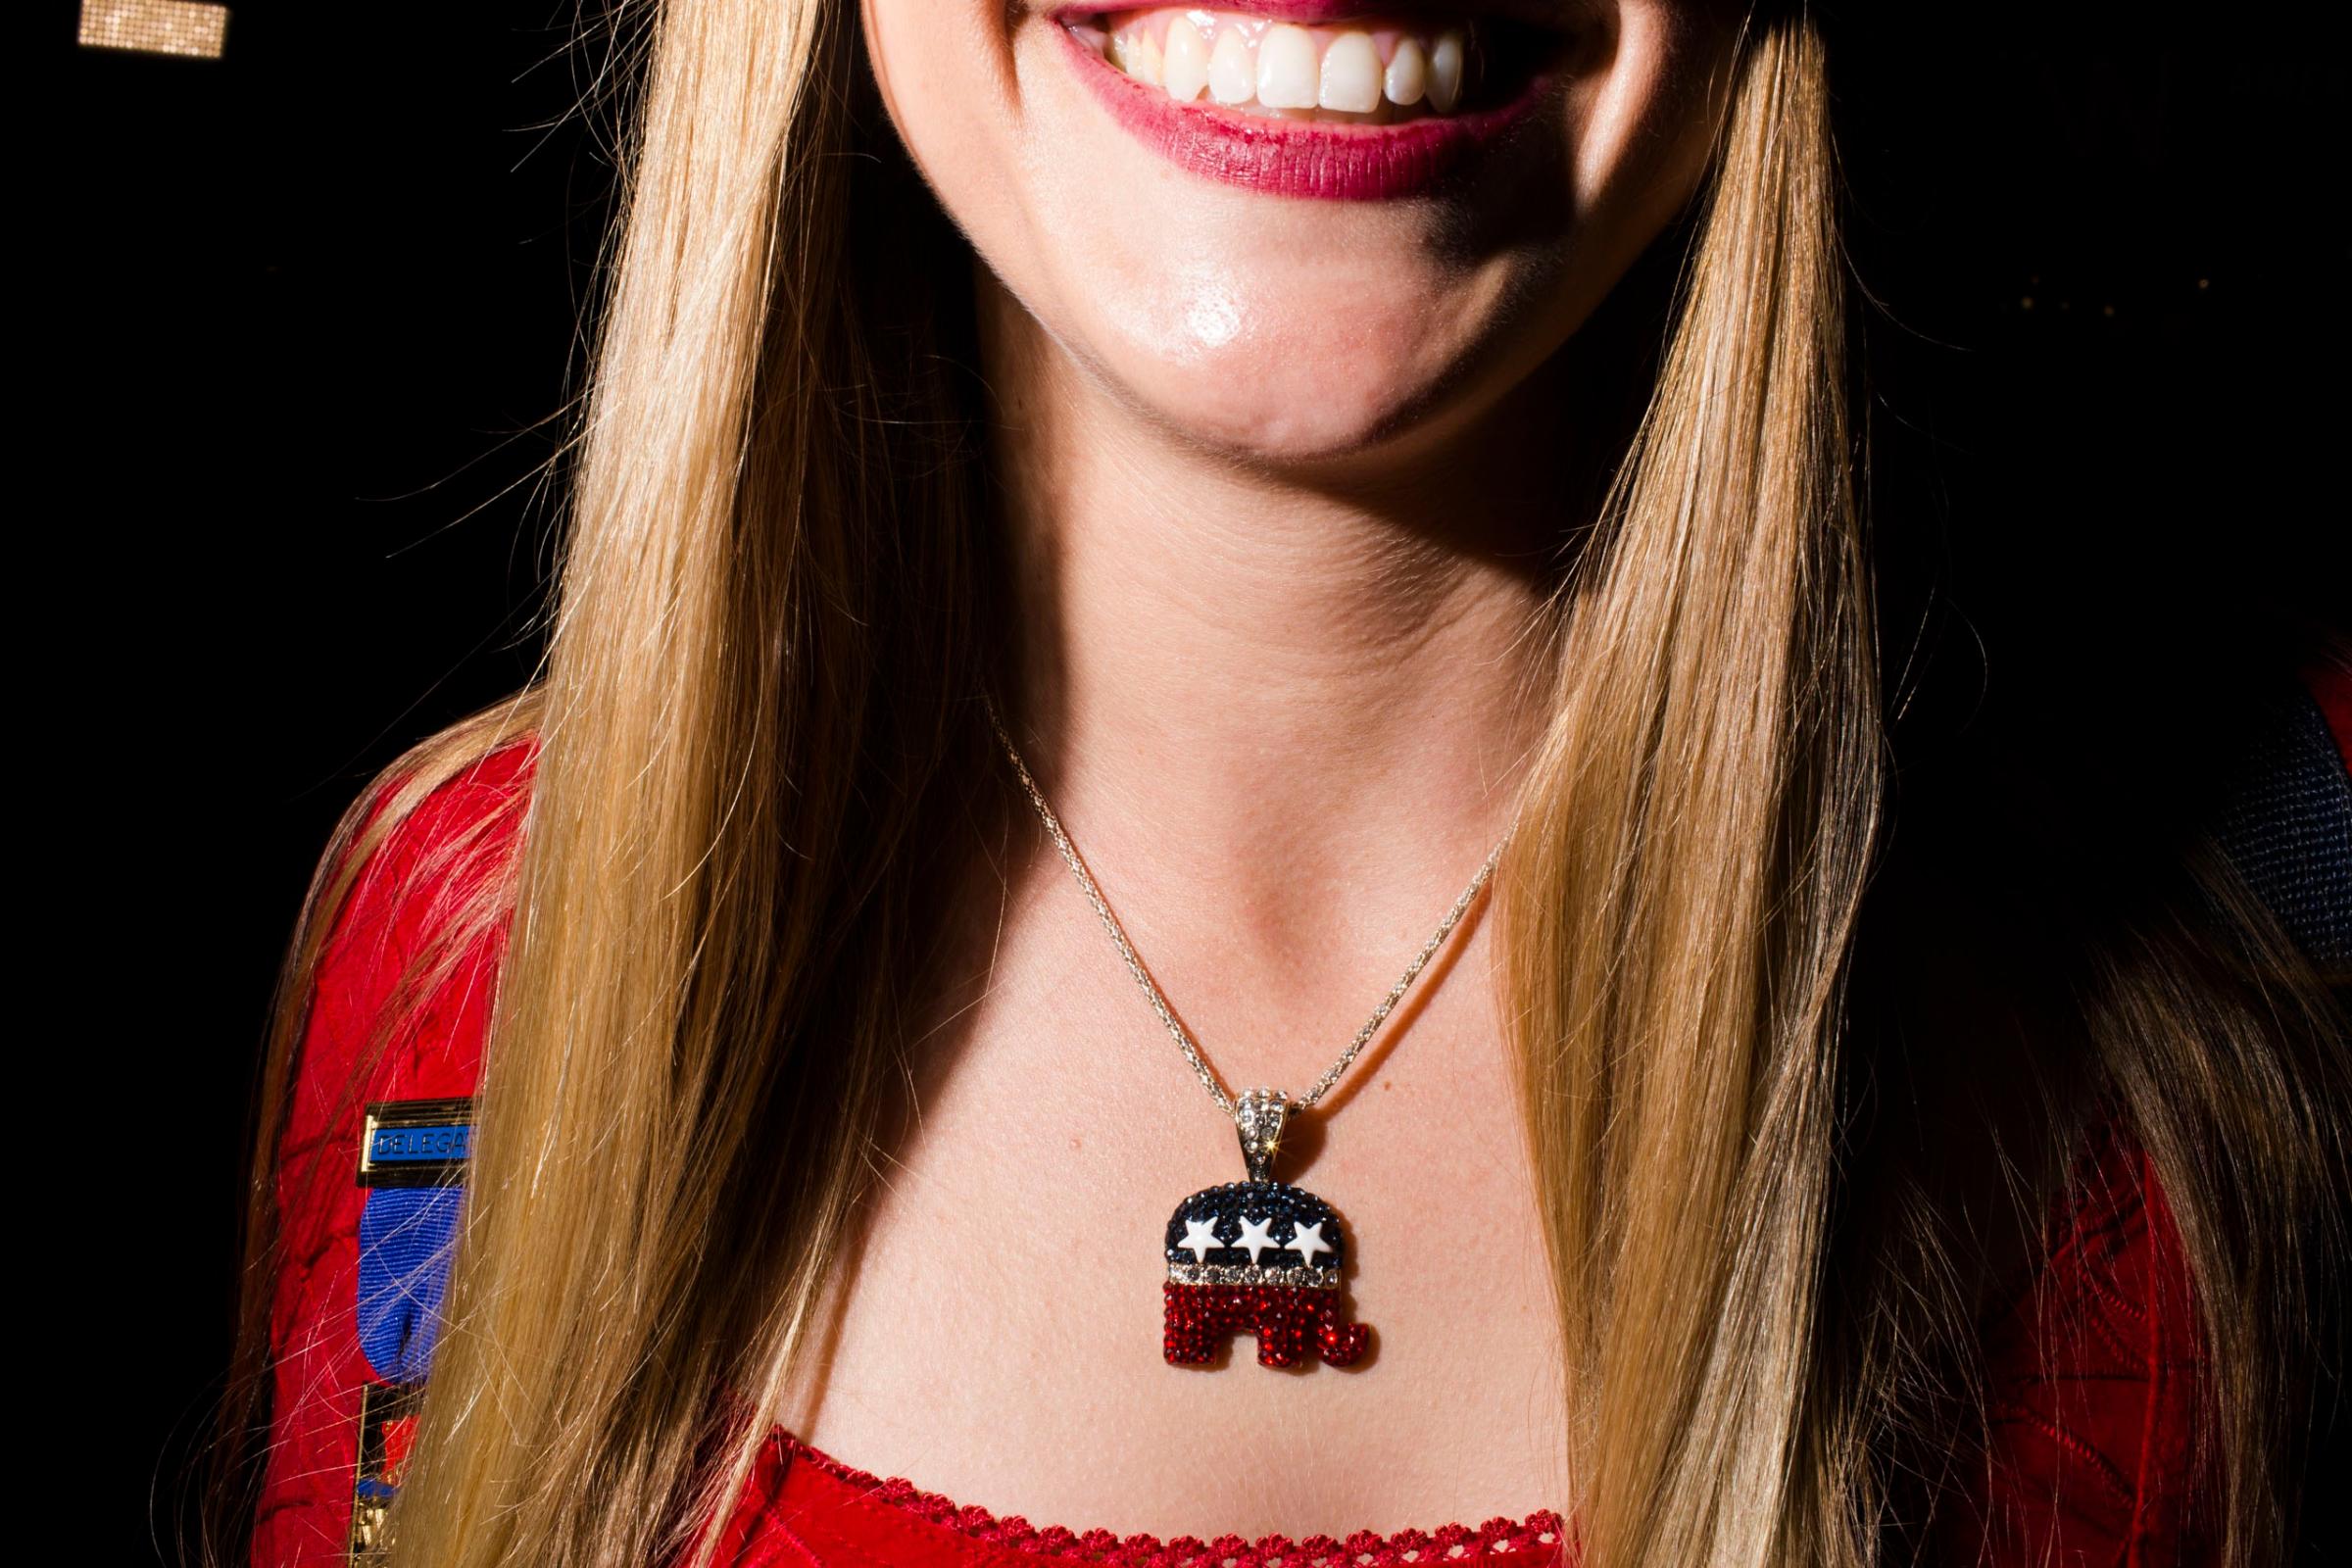 An elephant pendant is worn on the floor of the Republican National Convention in Cleveland on Tuesday, July 19, 2016.